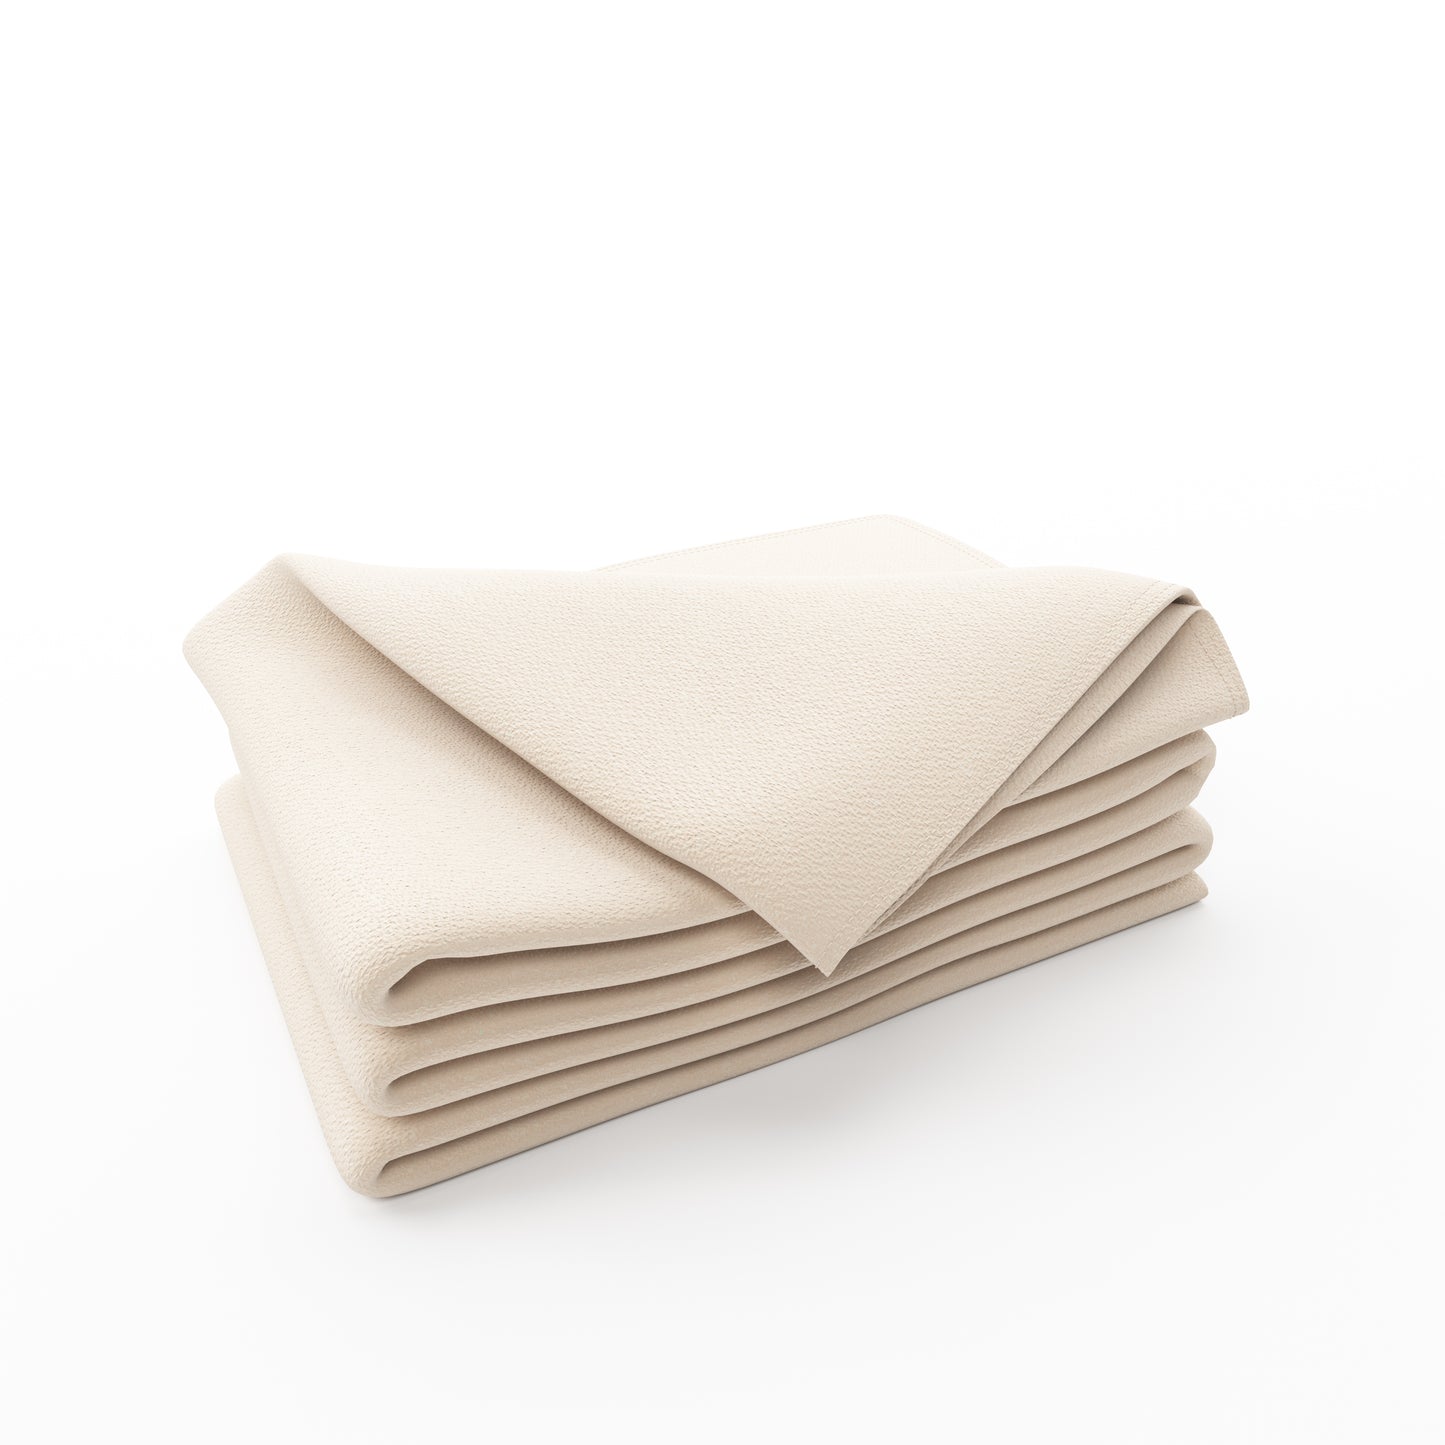 Certified Organic Cotton Knitted Bed Blanket - Organic Mattresses, Inc.